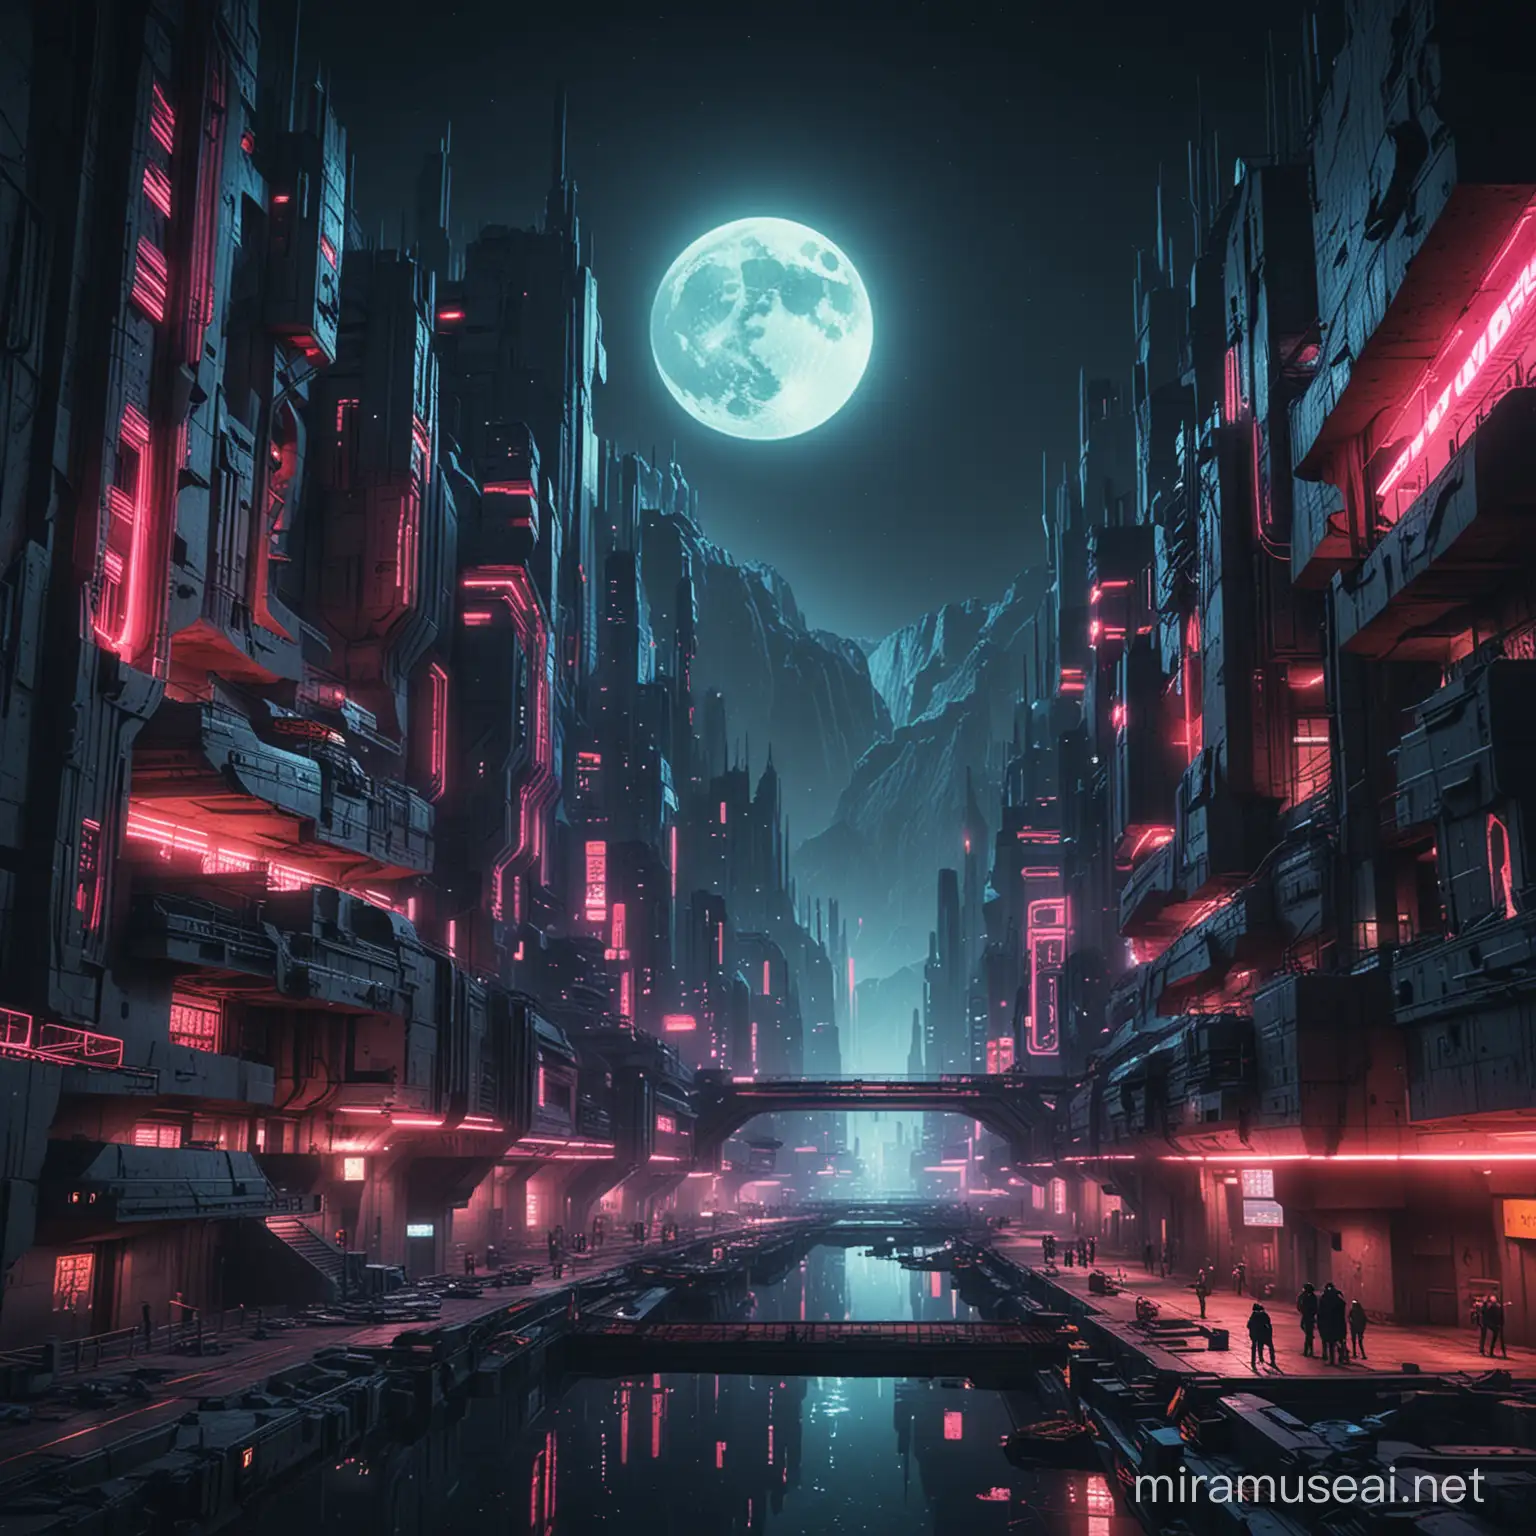 CITY BUILT IN A LARGE CANYON AT NIGHT? MOON LIGHT. The city is a cyberpunk futuristic  brutalist architecture with a lot of concriete and neon lights